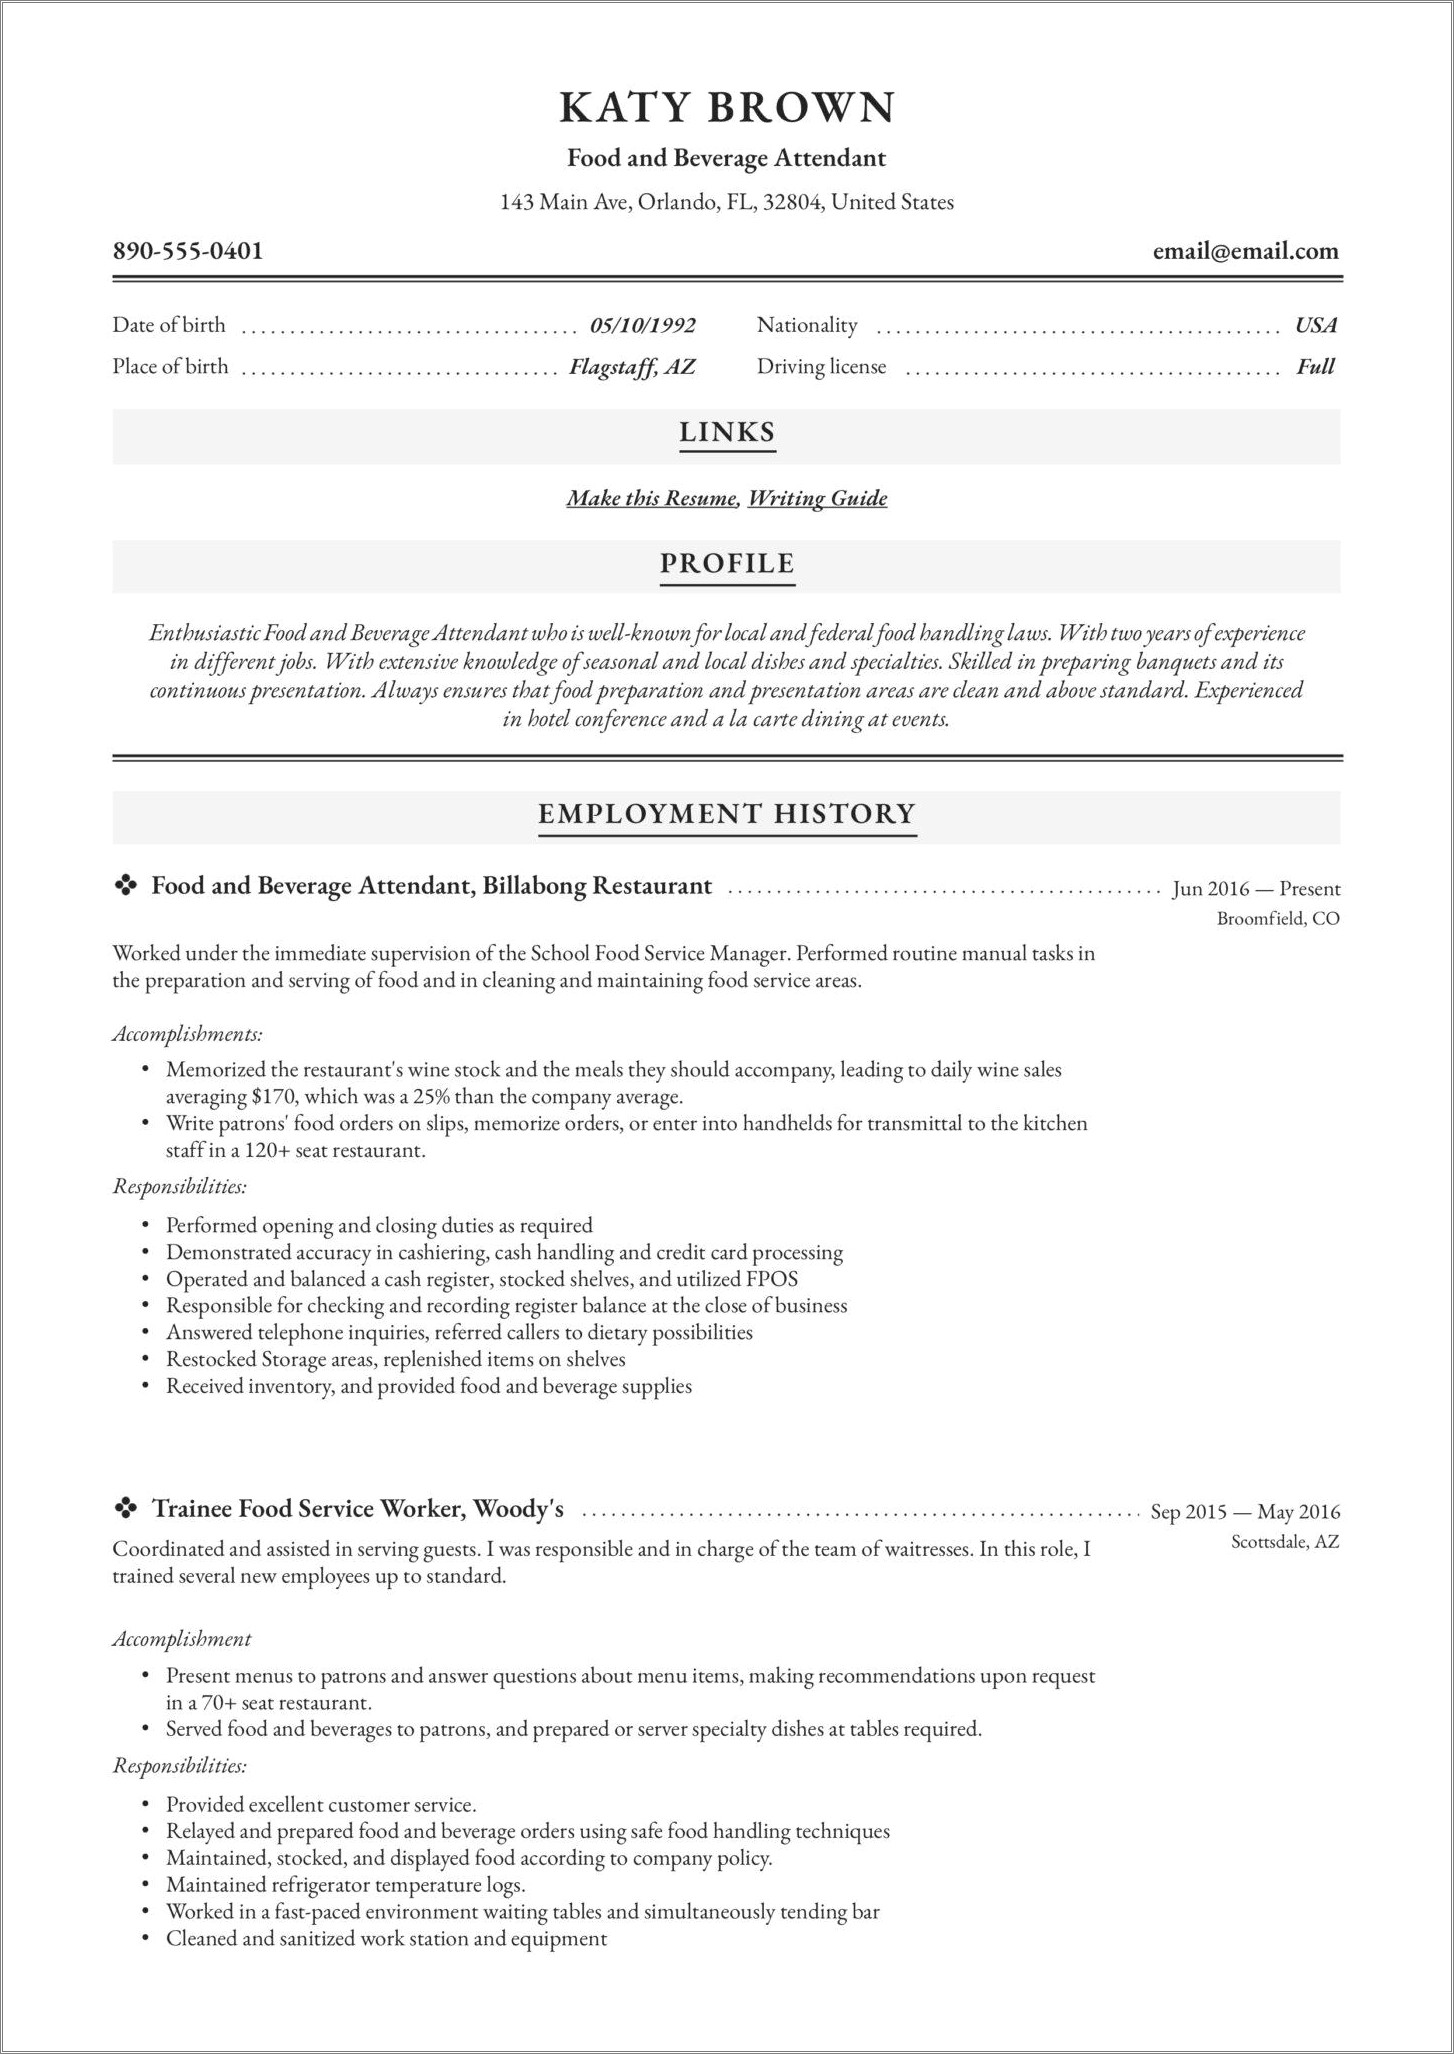 Resume Objectives For Hospitality And Customer Service